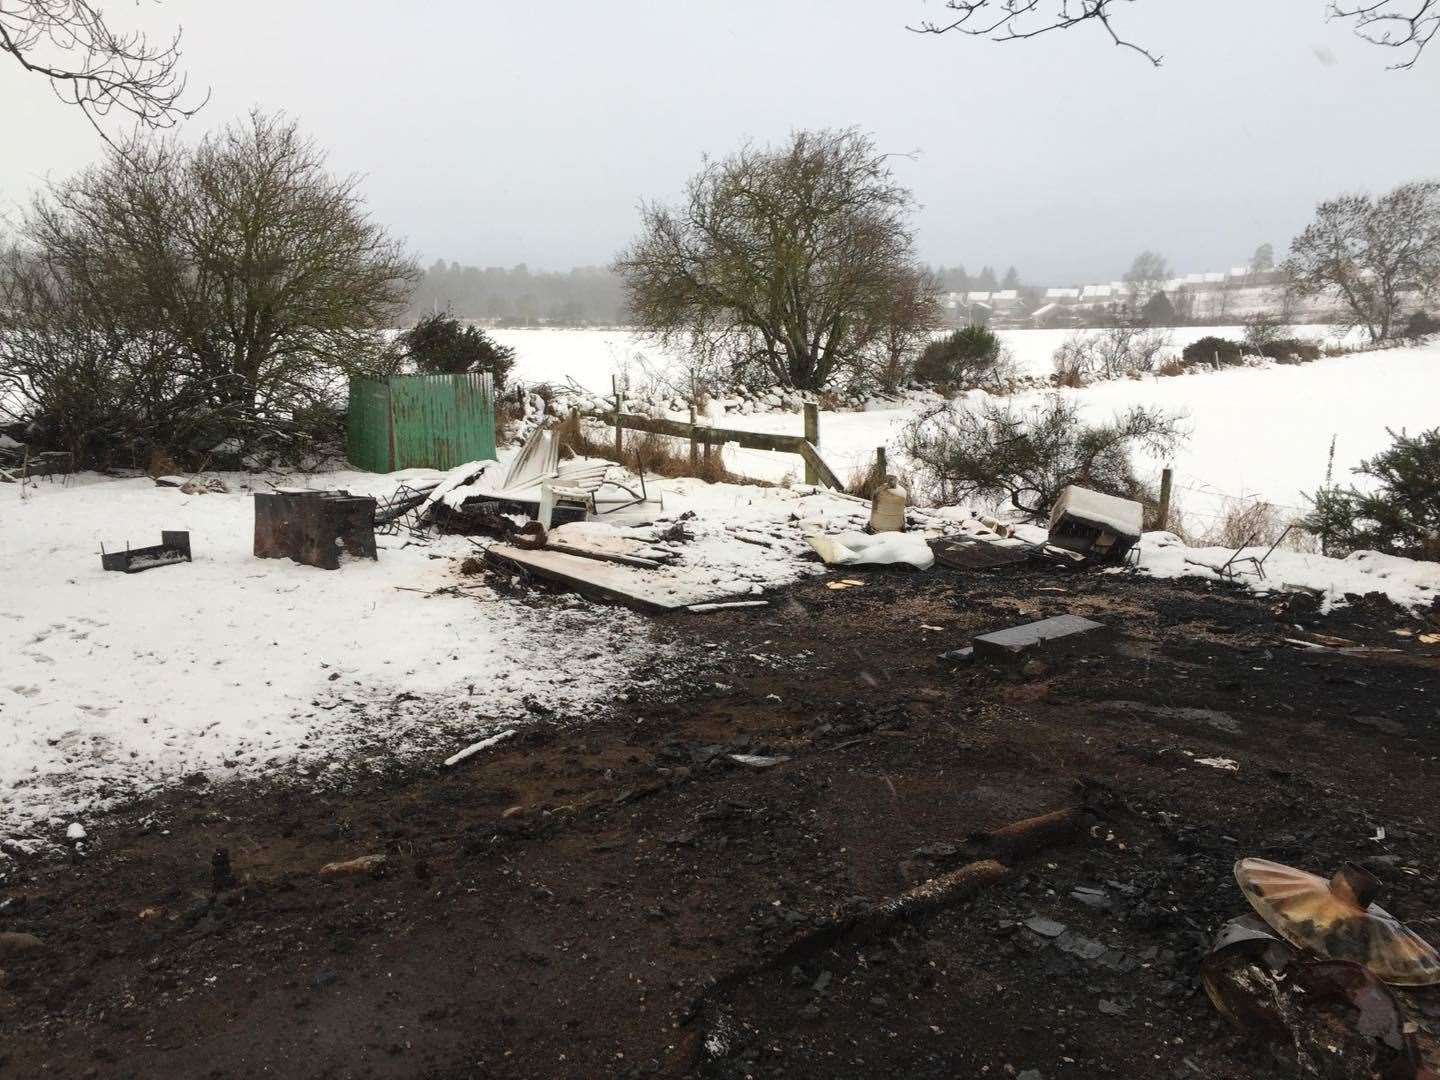 Kemnay Rifle Club have made an appeal for information after their premises were destroyed in a fire.